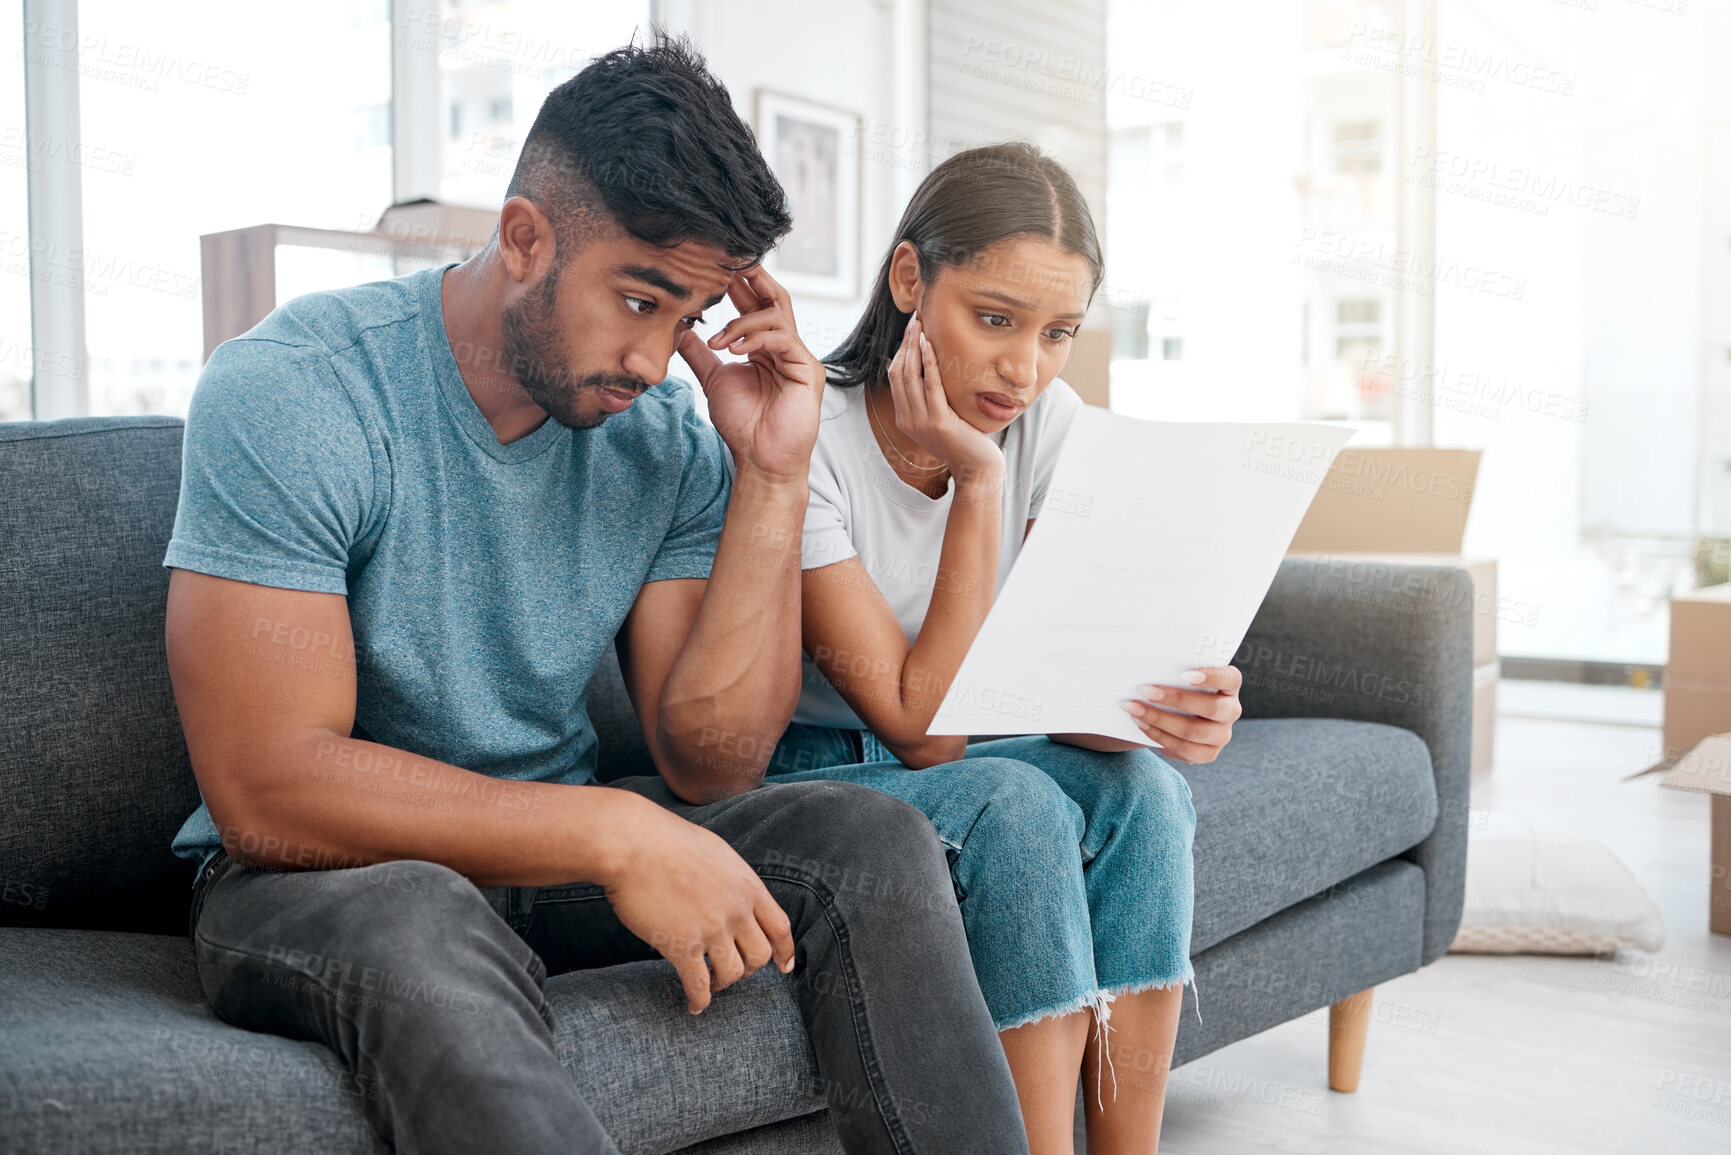 Buy stock photo Shot of a young couple sitting on the sofa at home and feeling stressed after receiving an eviction notice